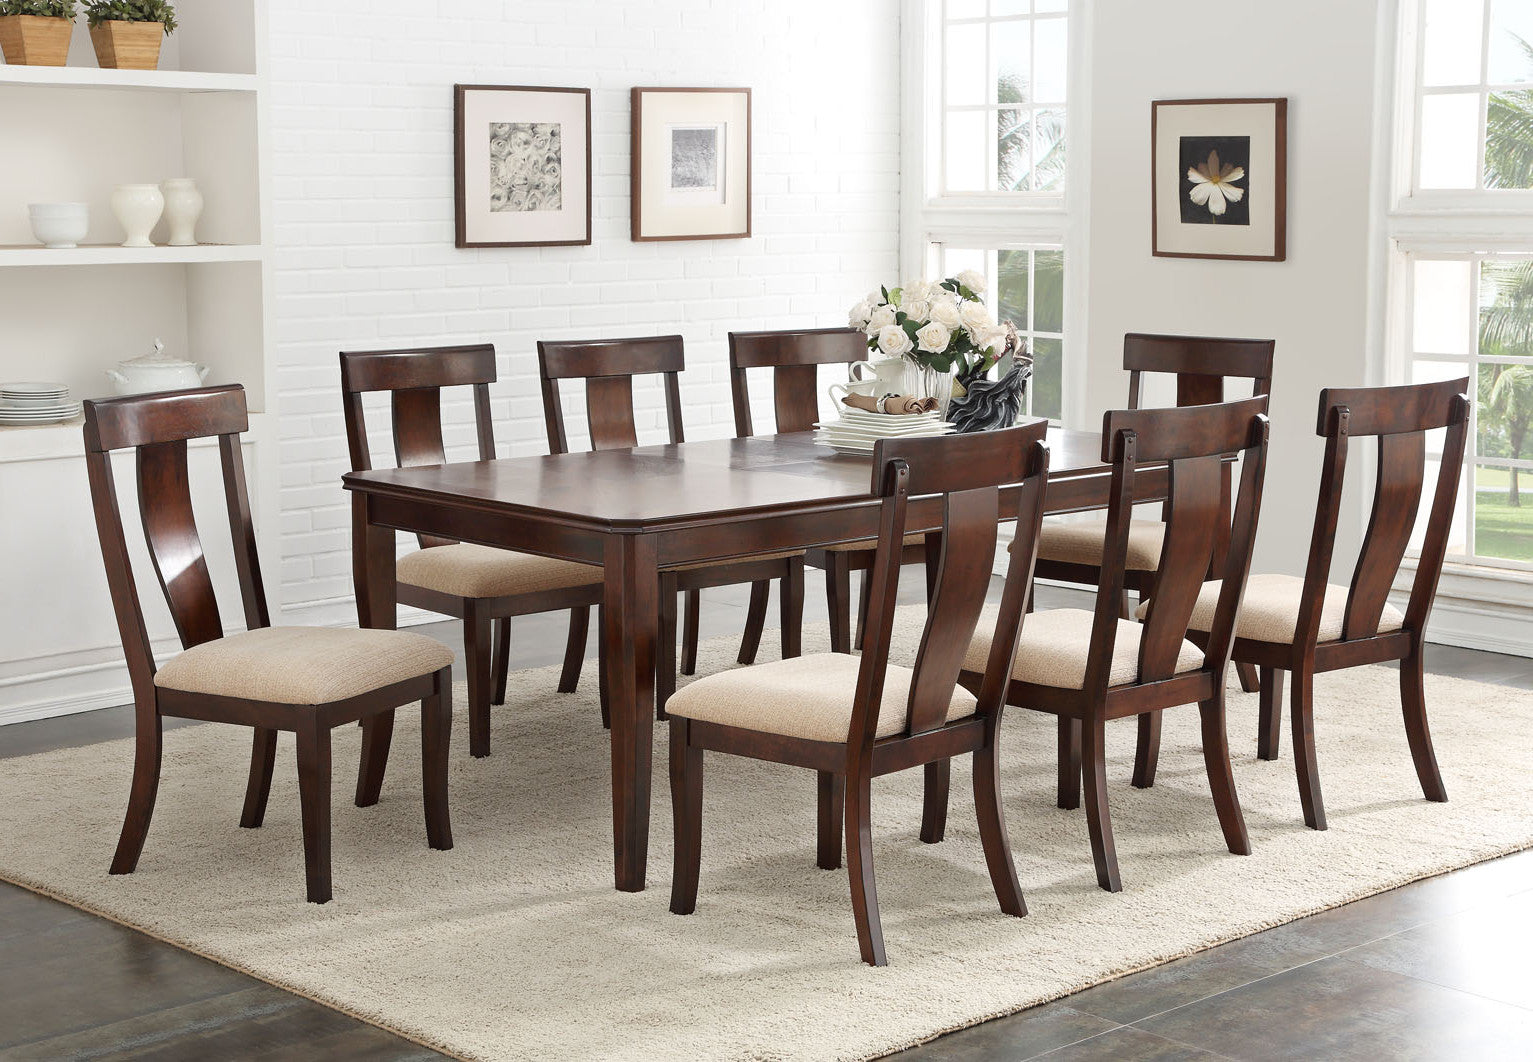 Rowena Formal Dining Room Table Cherry Wood Rectangular Contemporary With 18 Leaf Extension Pilaster Designs